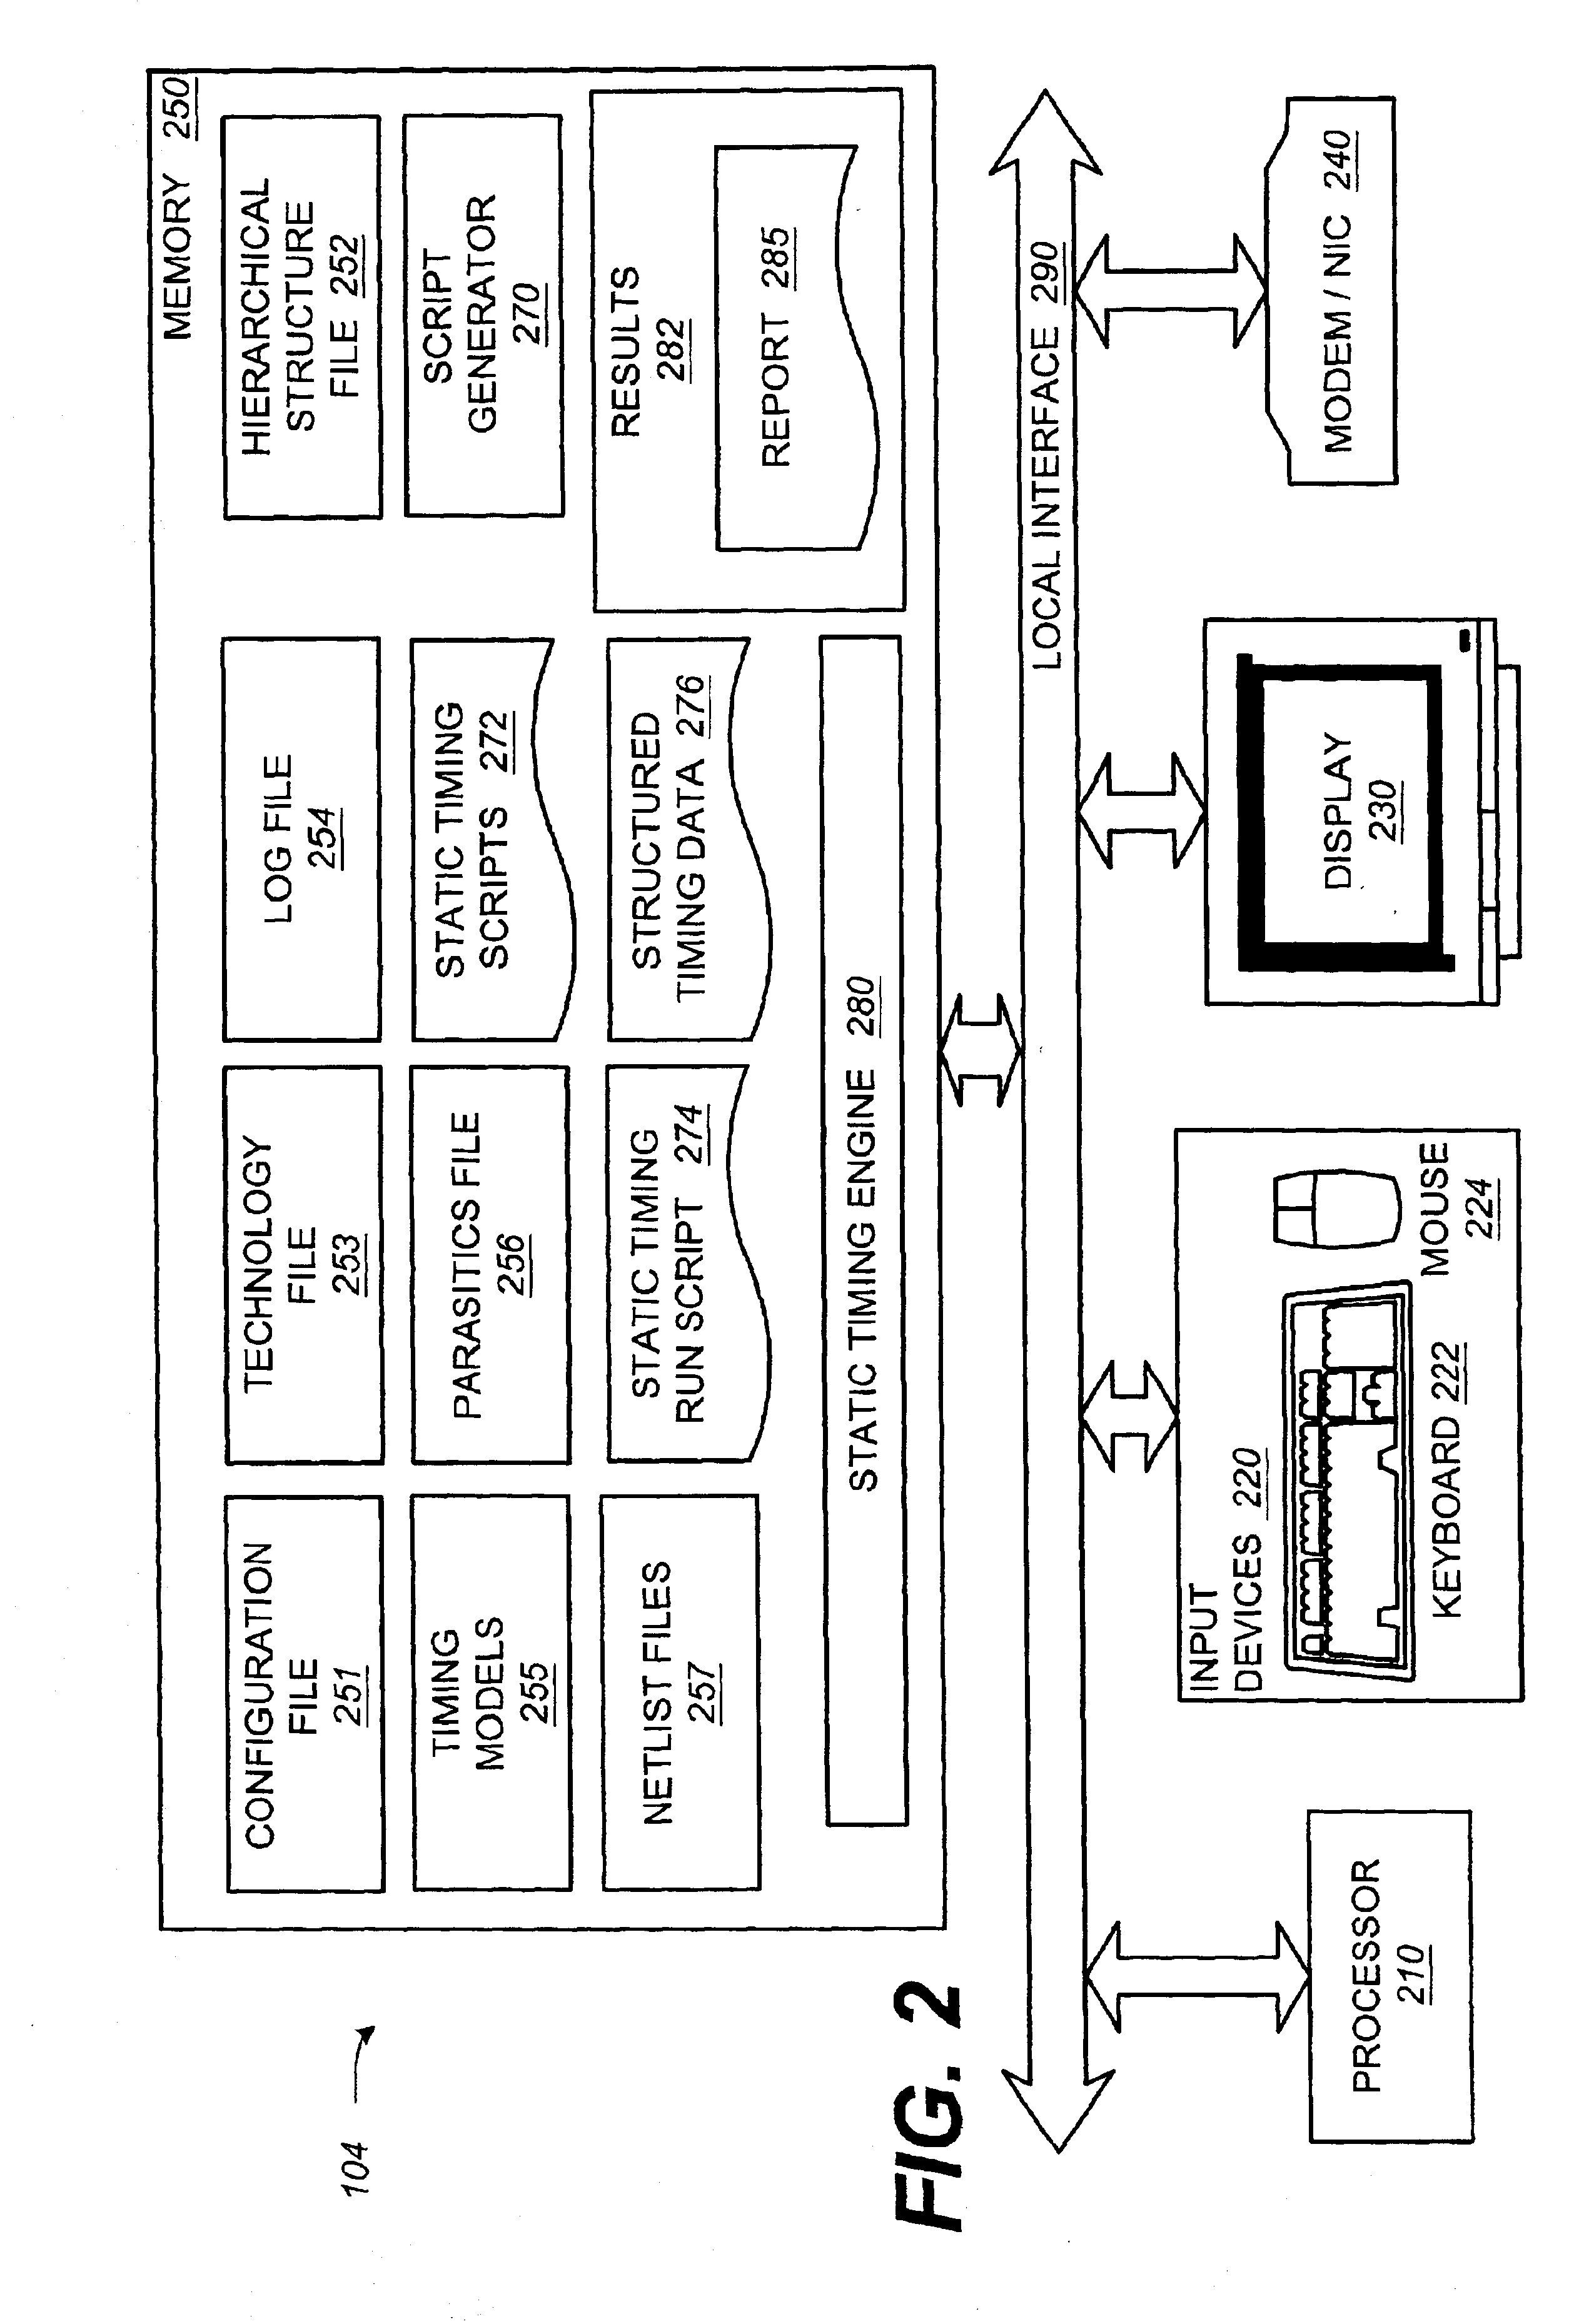 System and method for applying timing models in a static-timing analysis of a hierarchical integrated circuit design